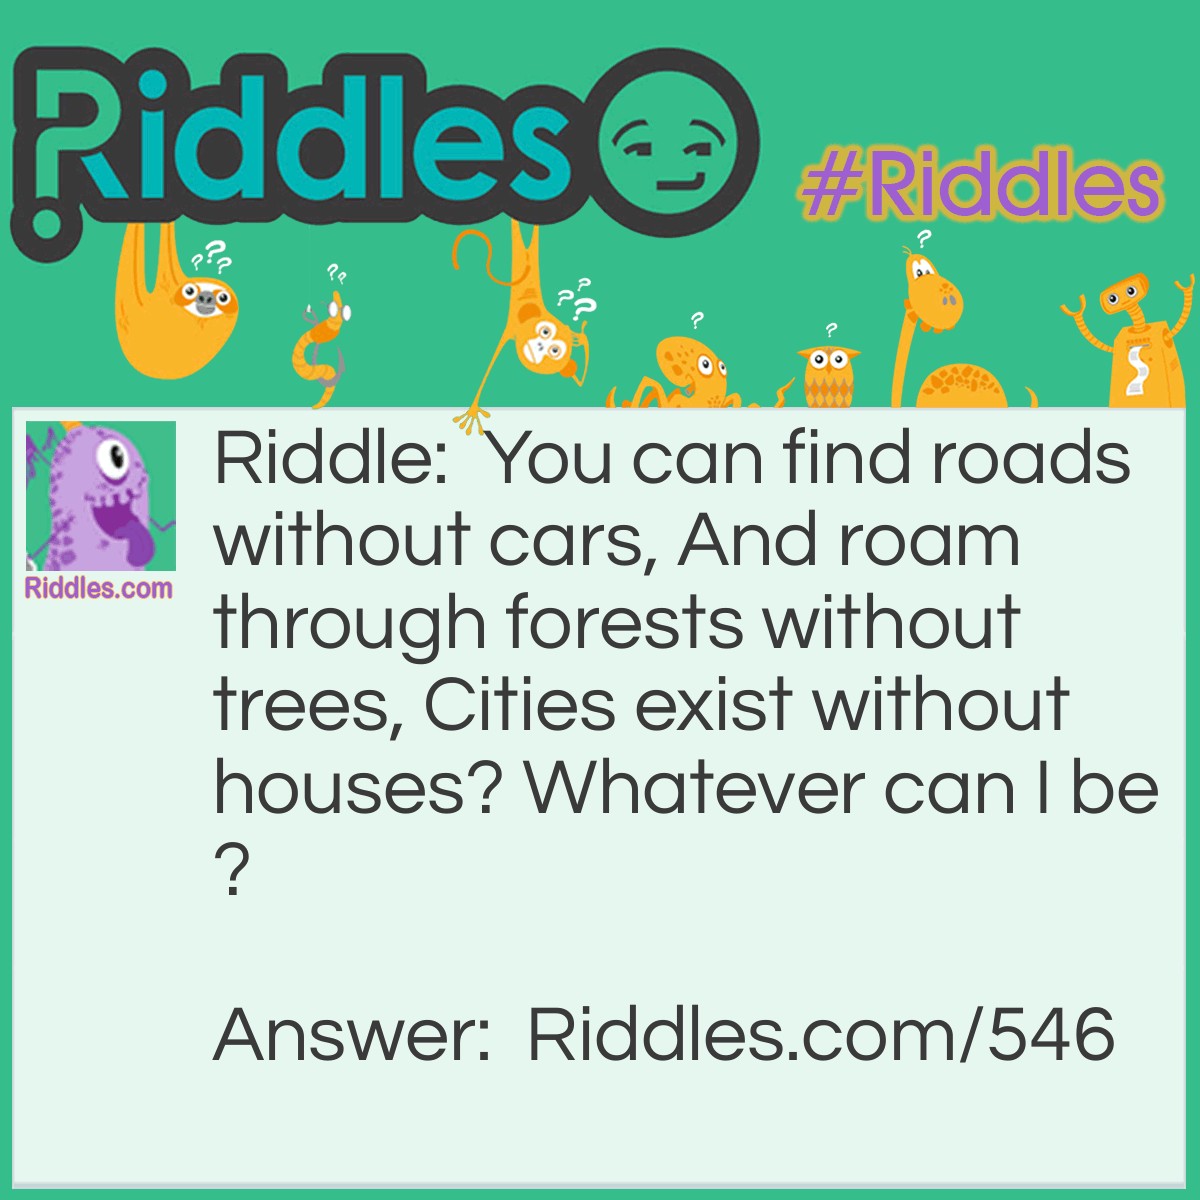 Riddle: You can find roads without cars, And roam through forests without trees, Cities exist without houses? Whatever can I be? Answer: A map.